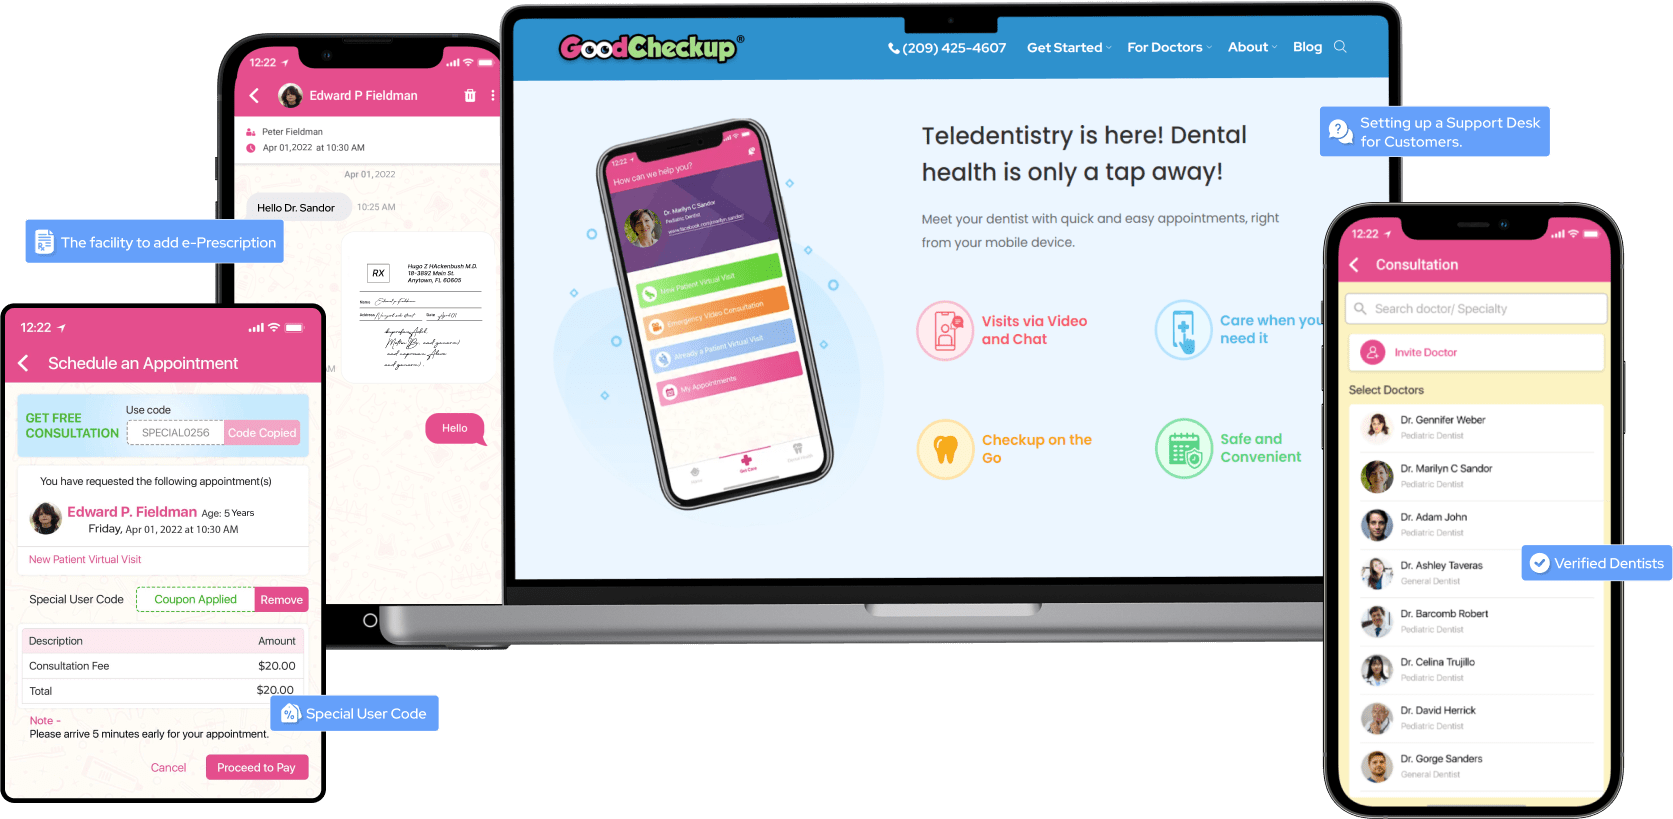 GoodCheckup overview